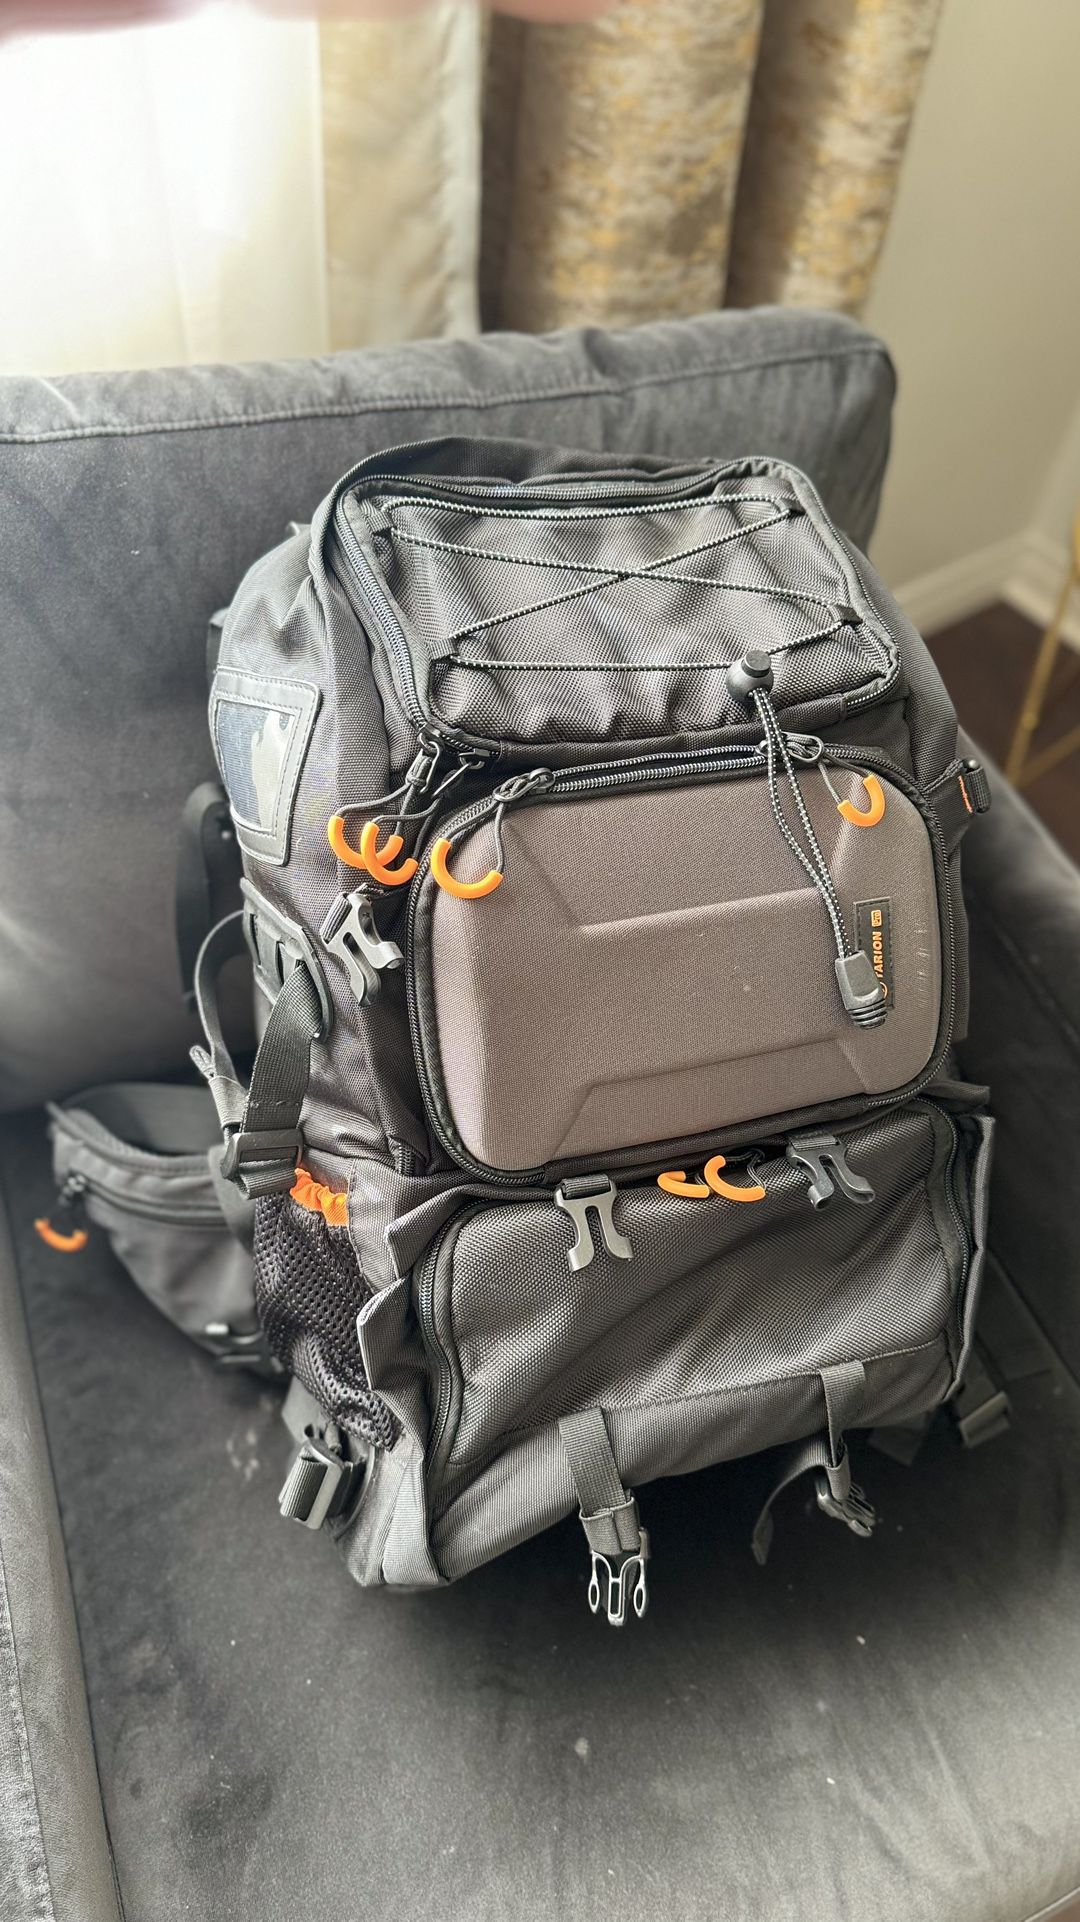 Tarion Pro Hiking Backpack